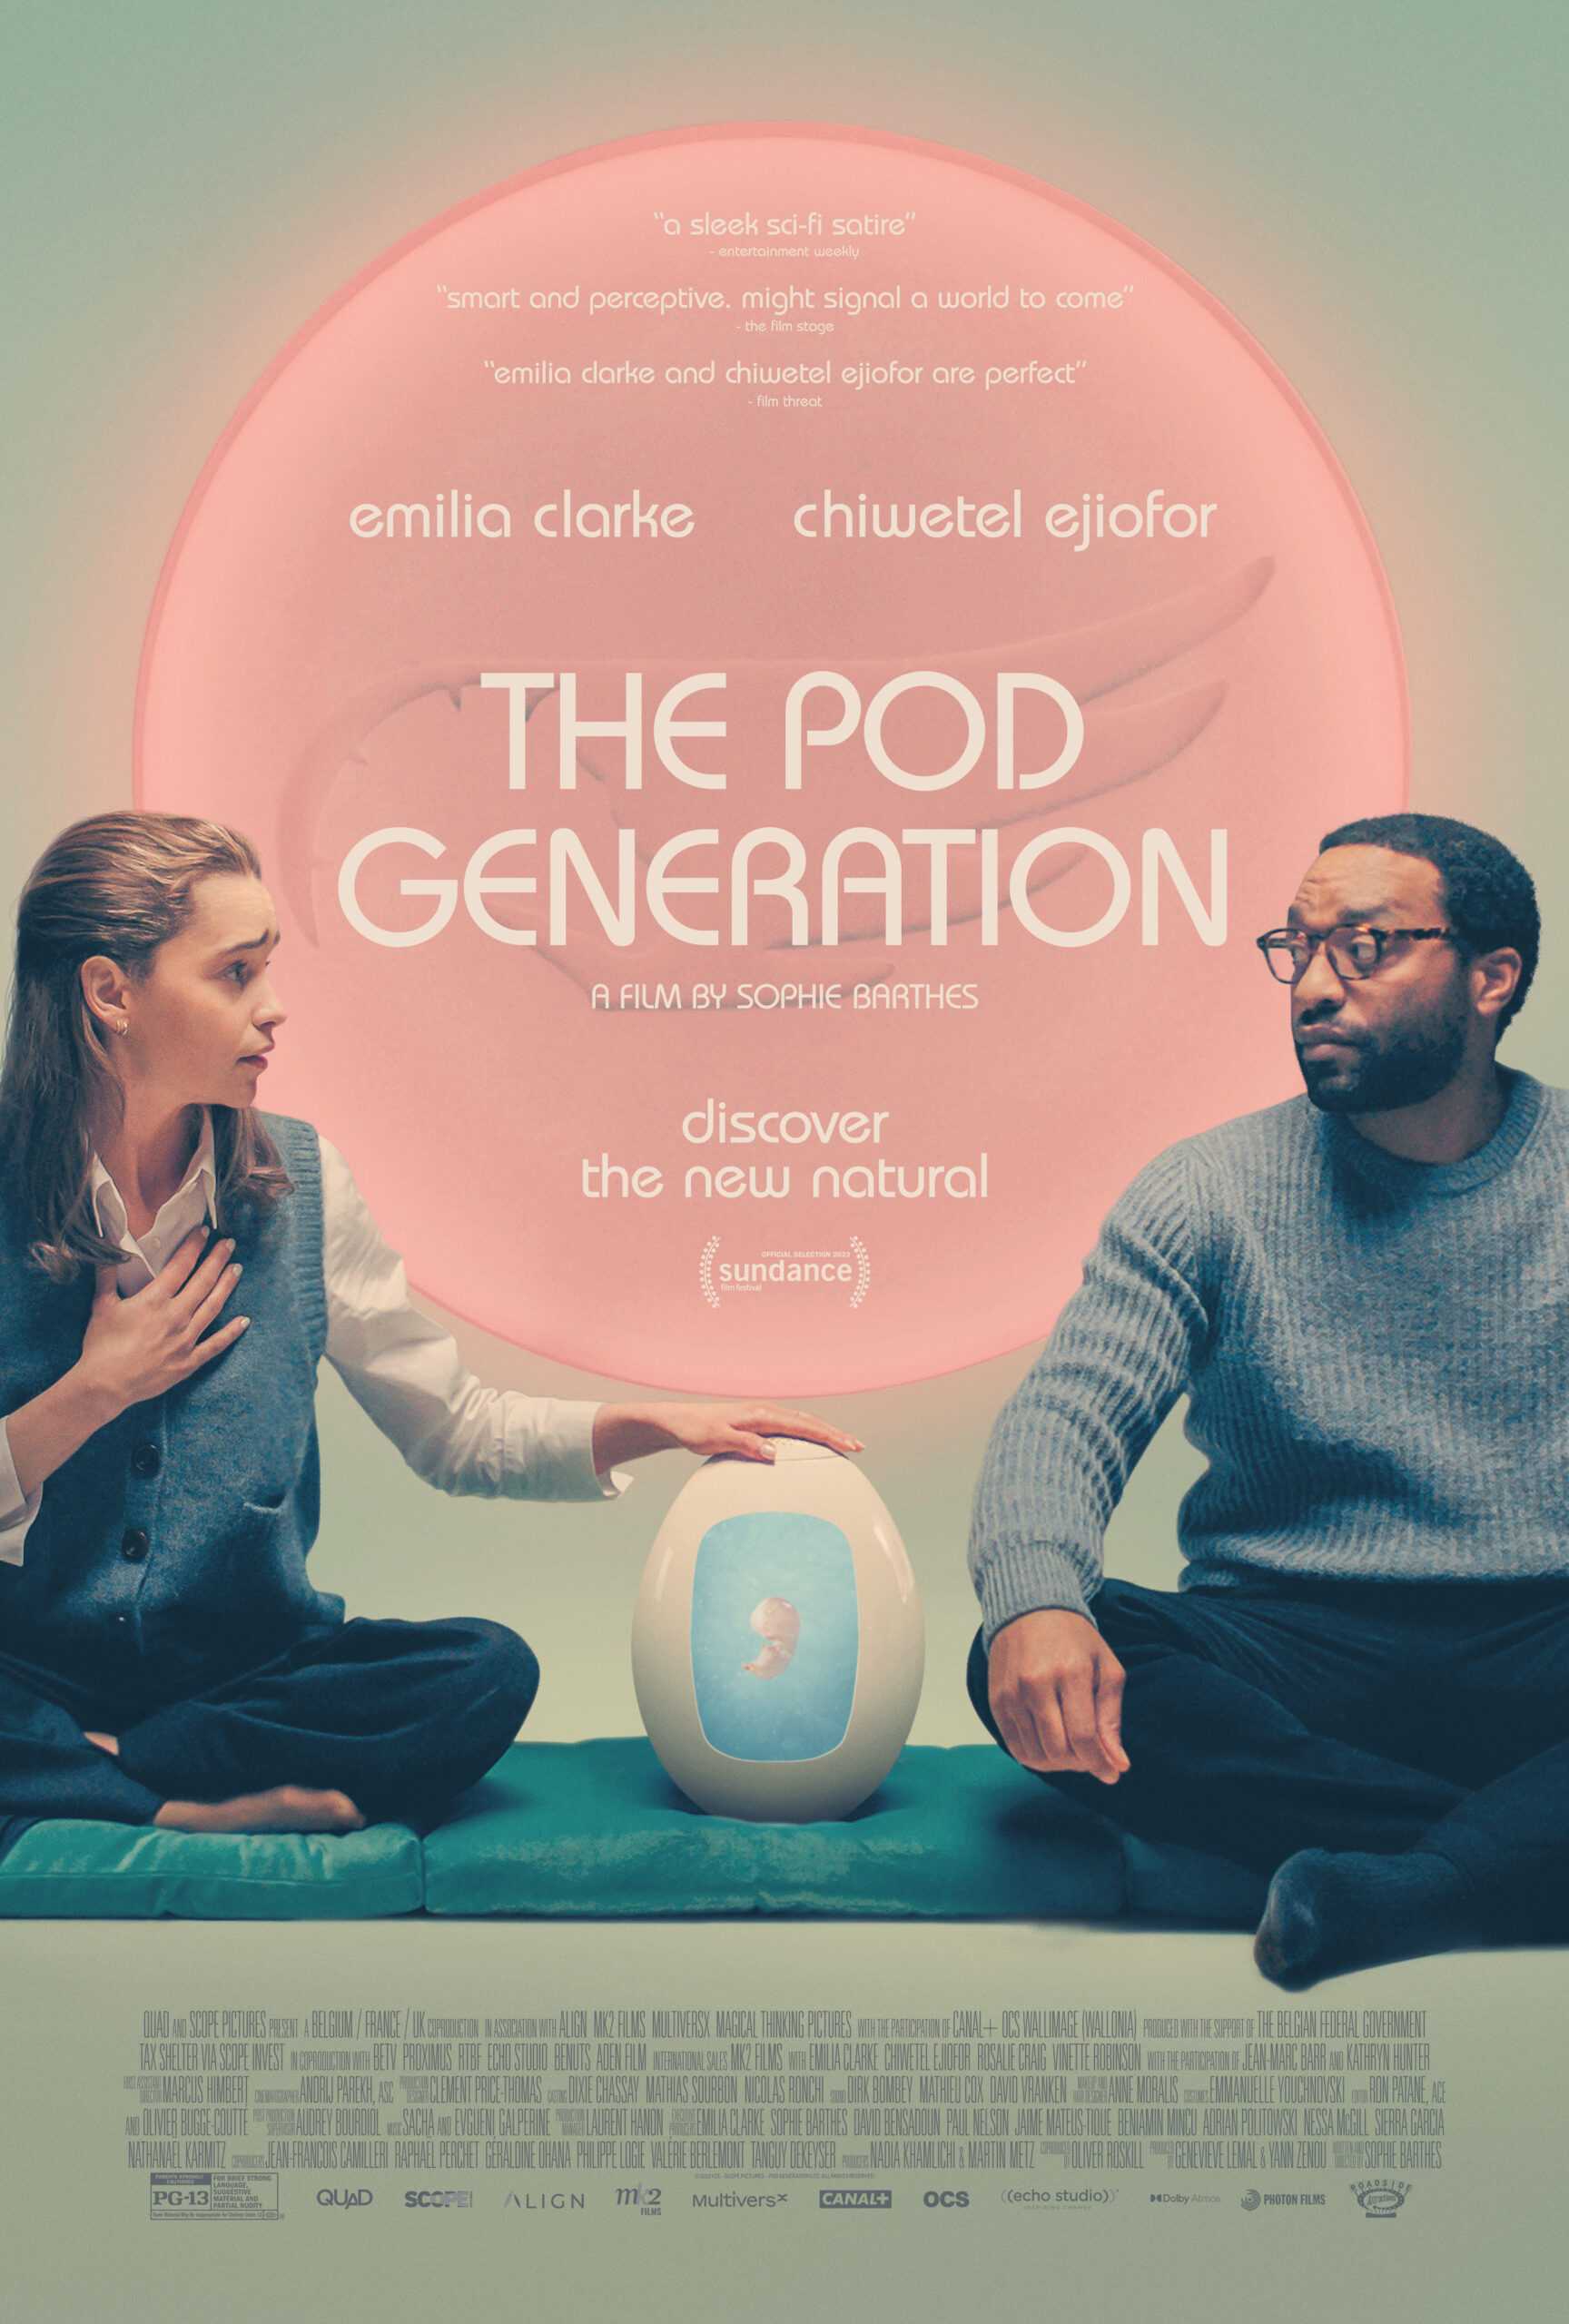 Emilia Clarke and Chiwetel Ejiofor sit legs crossed with a white pod between them, in which a fetus can be seen.